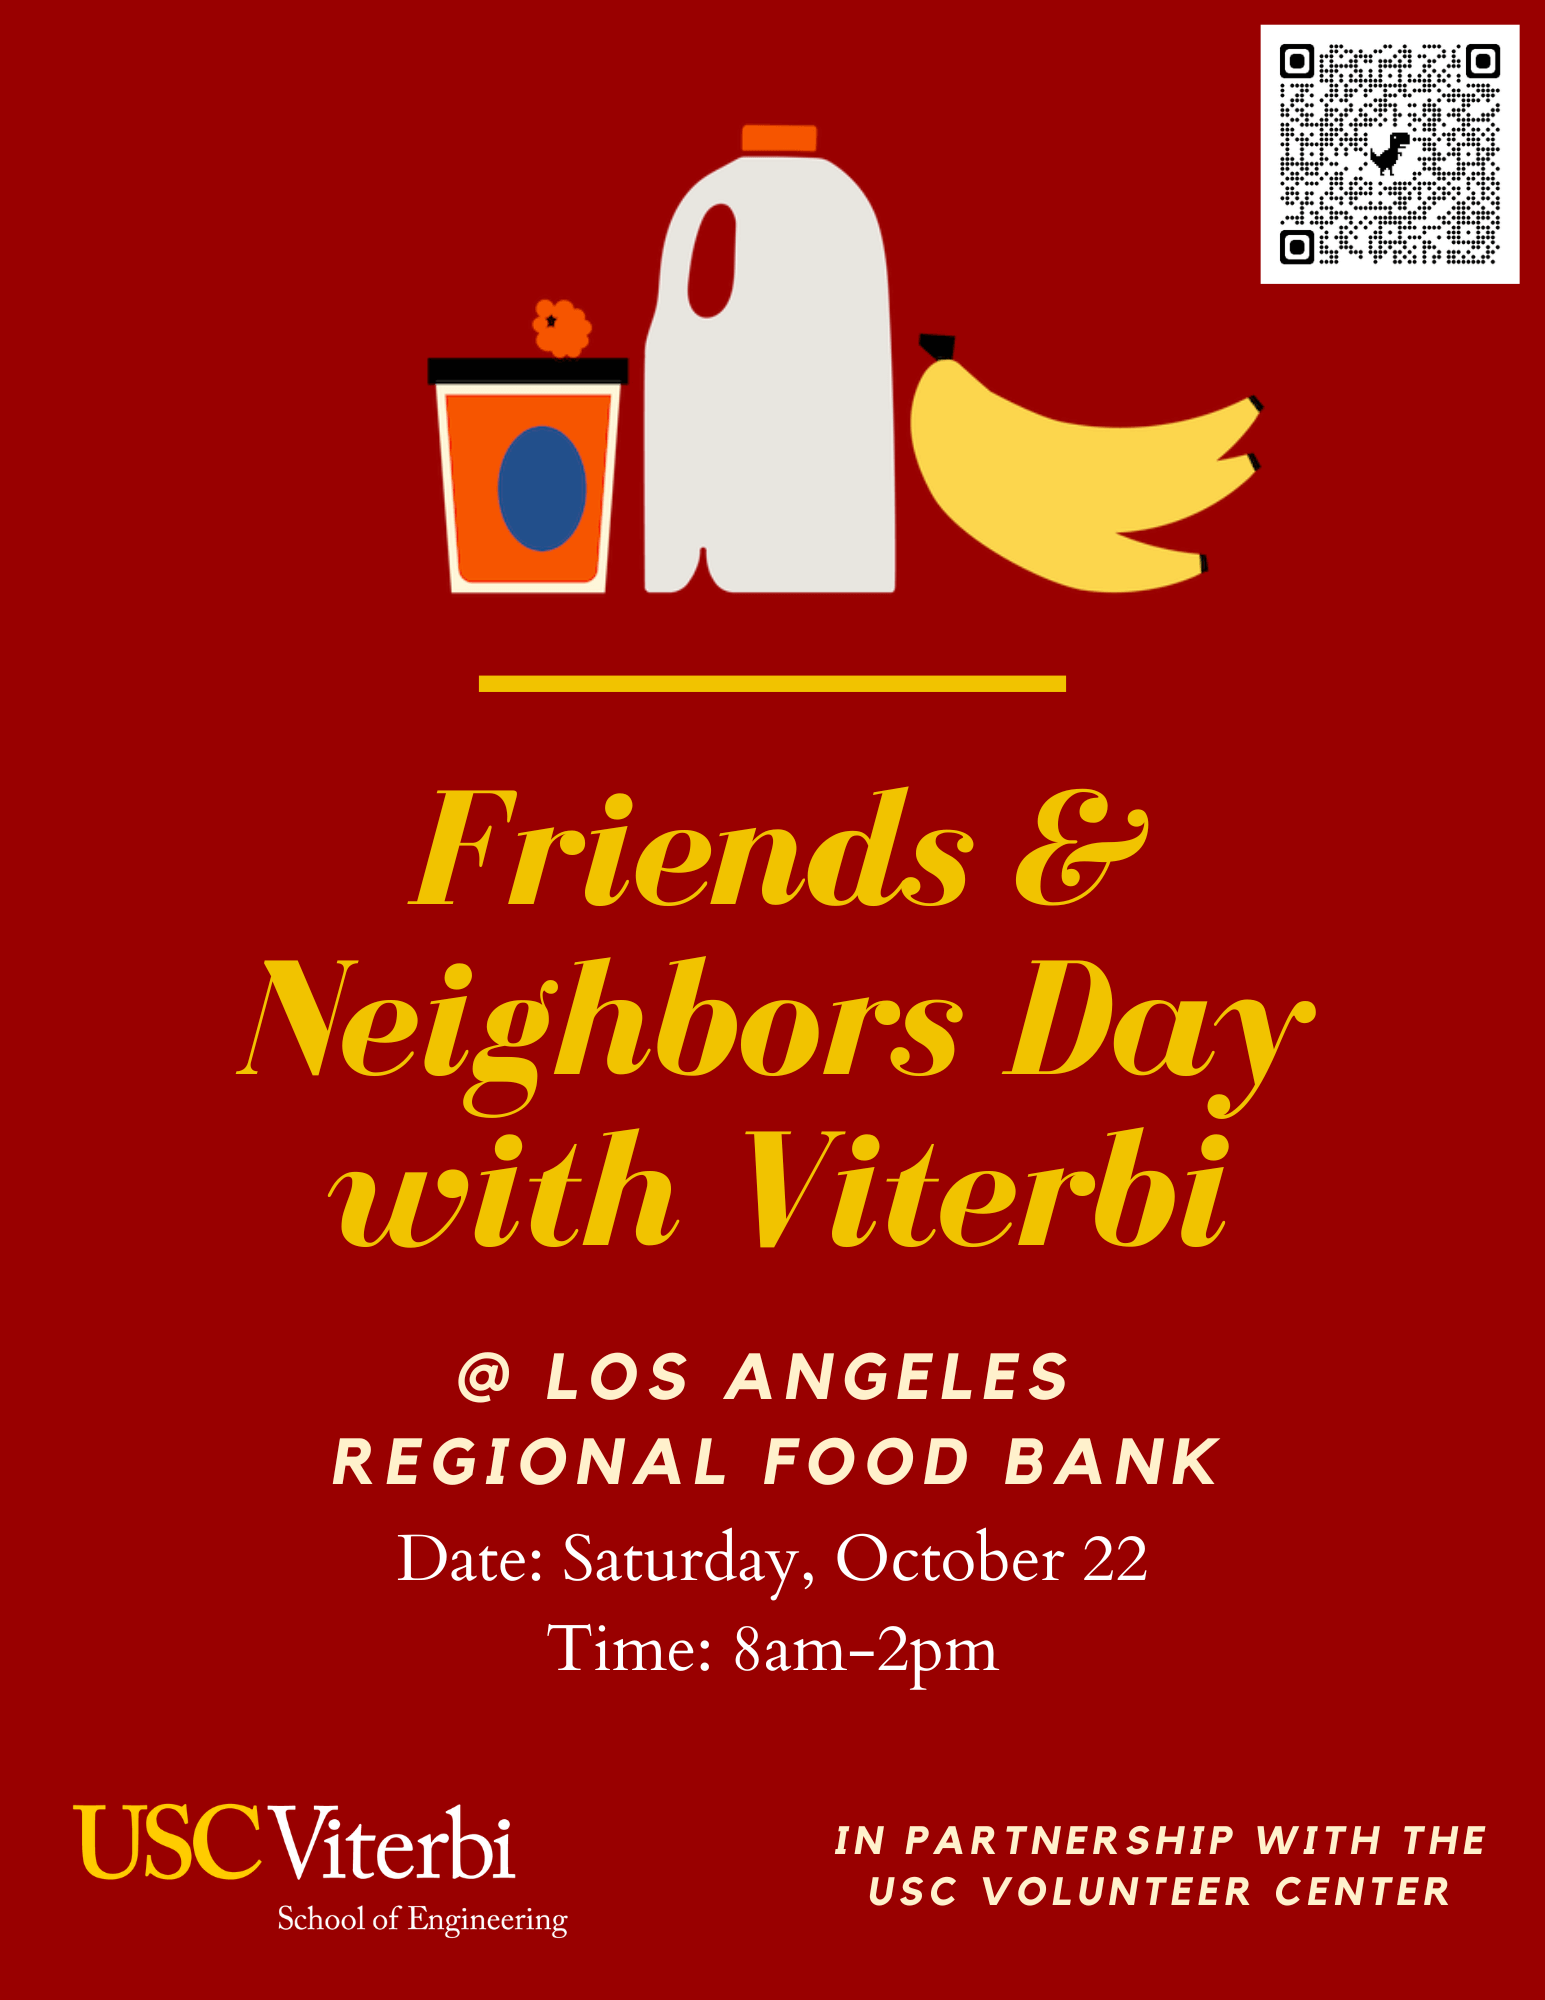 Featured image for “Friends & Neighbors Day with Viterbi at Los Angeles Regional Food Bank”